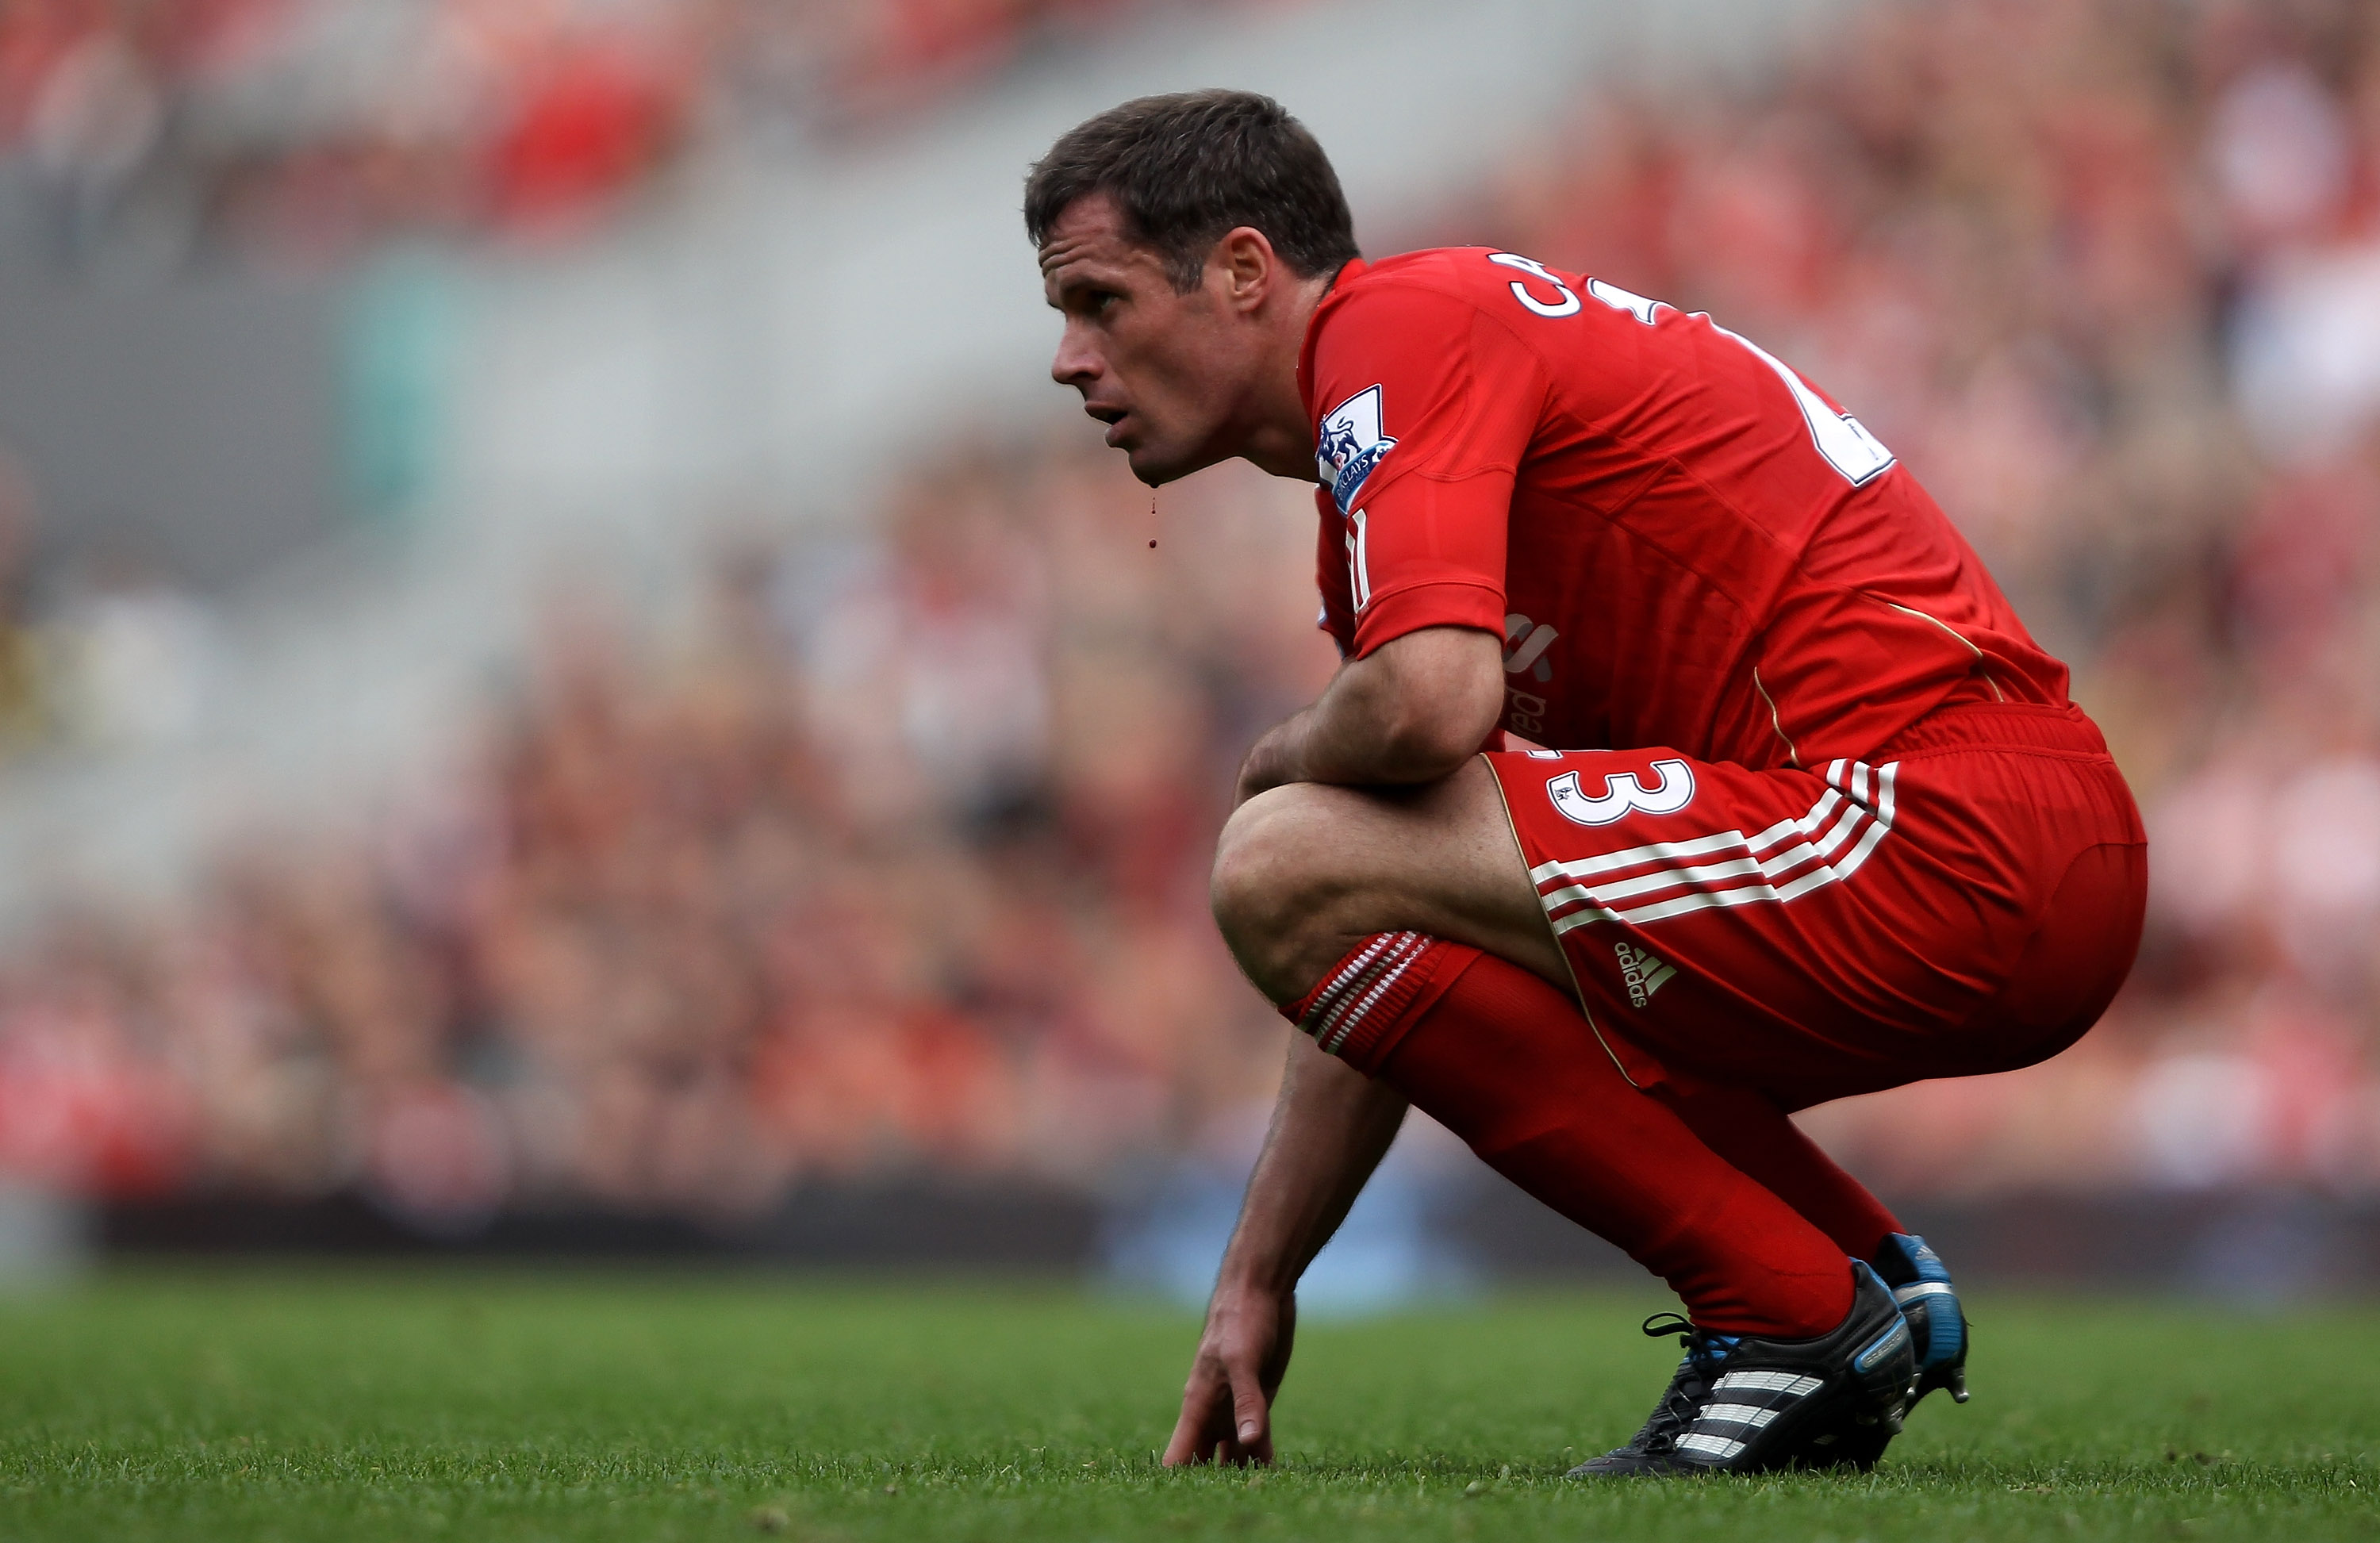 LIVERPOOL, ENGLAND - SEPTEMBER 25:  Jamie Carragher of Liverpool waits for treatment as blood drips off him after a clash of heads with team mate Martin Skrtel during the Barclays Premier League match between Liverpool and Sunderland at at Anfield on Sept